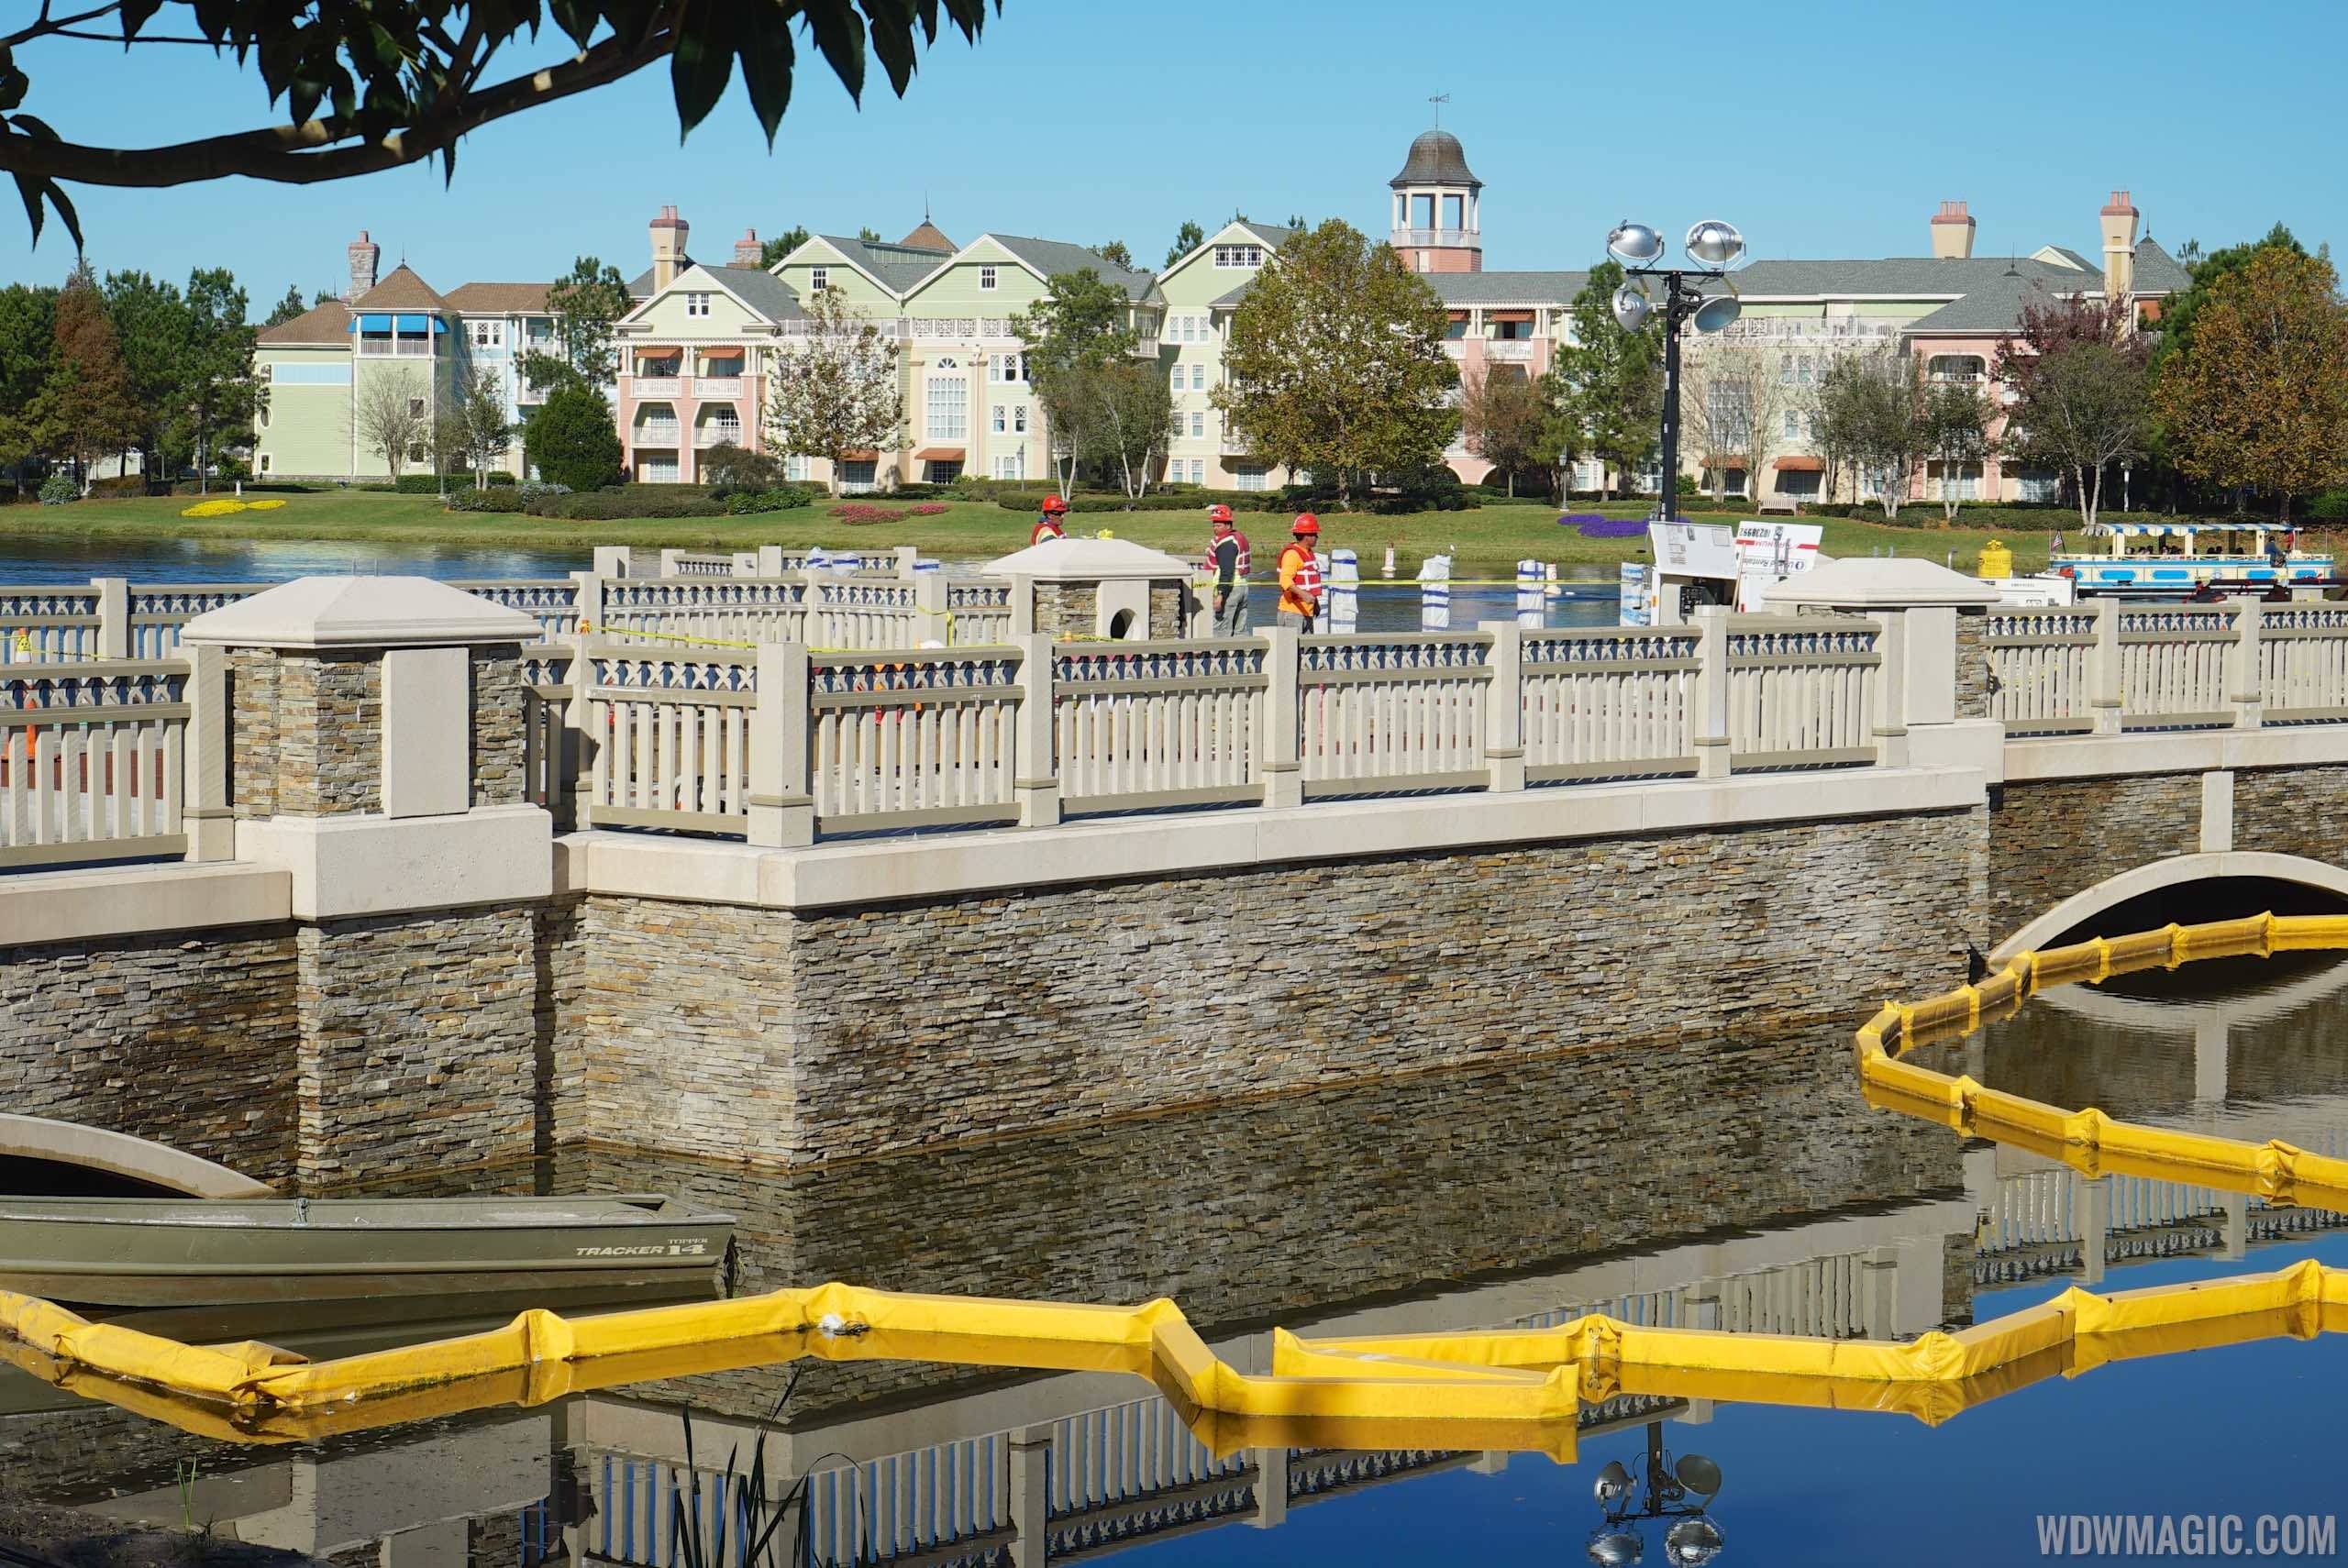 PHOTOS - Latest look at the Marketplace Causeway at Disney Springs